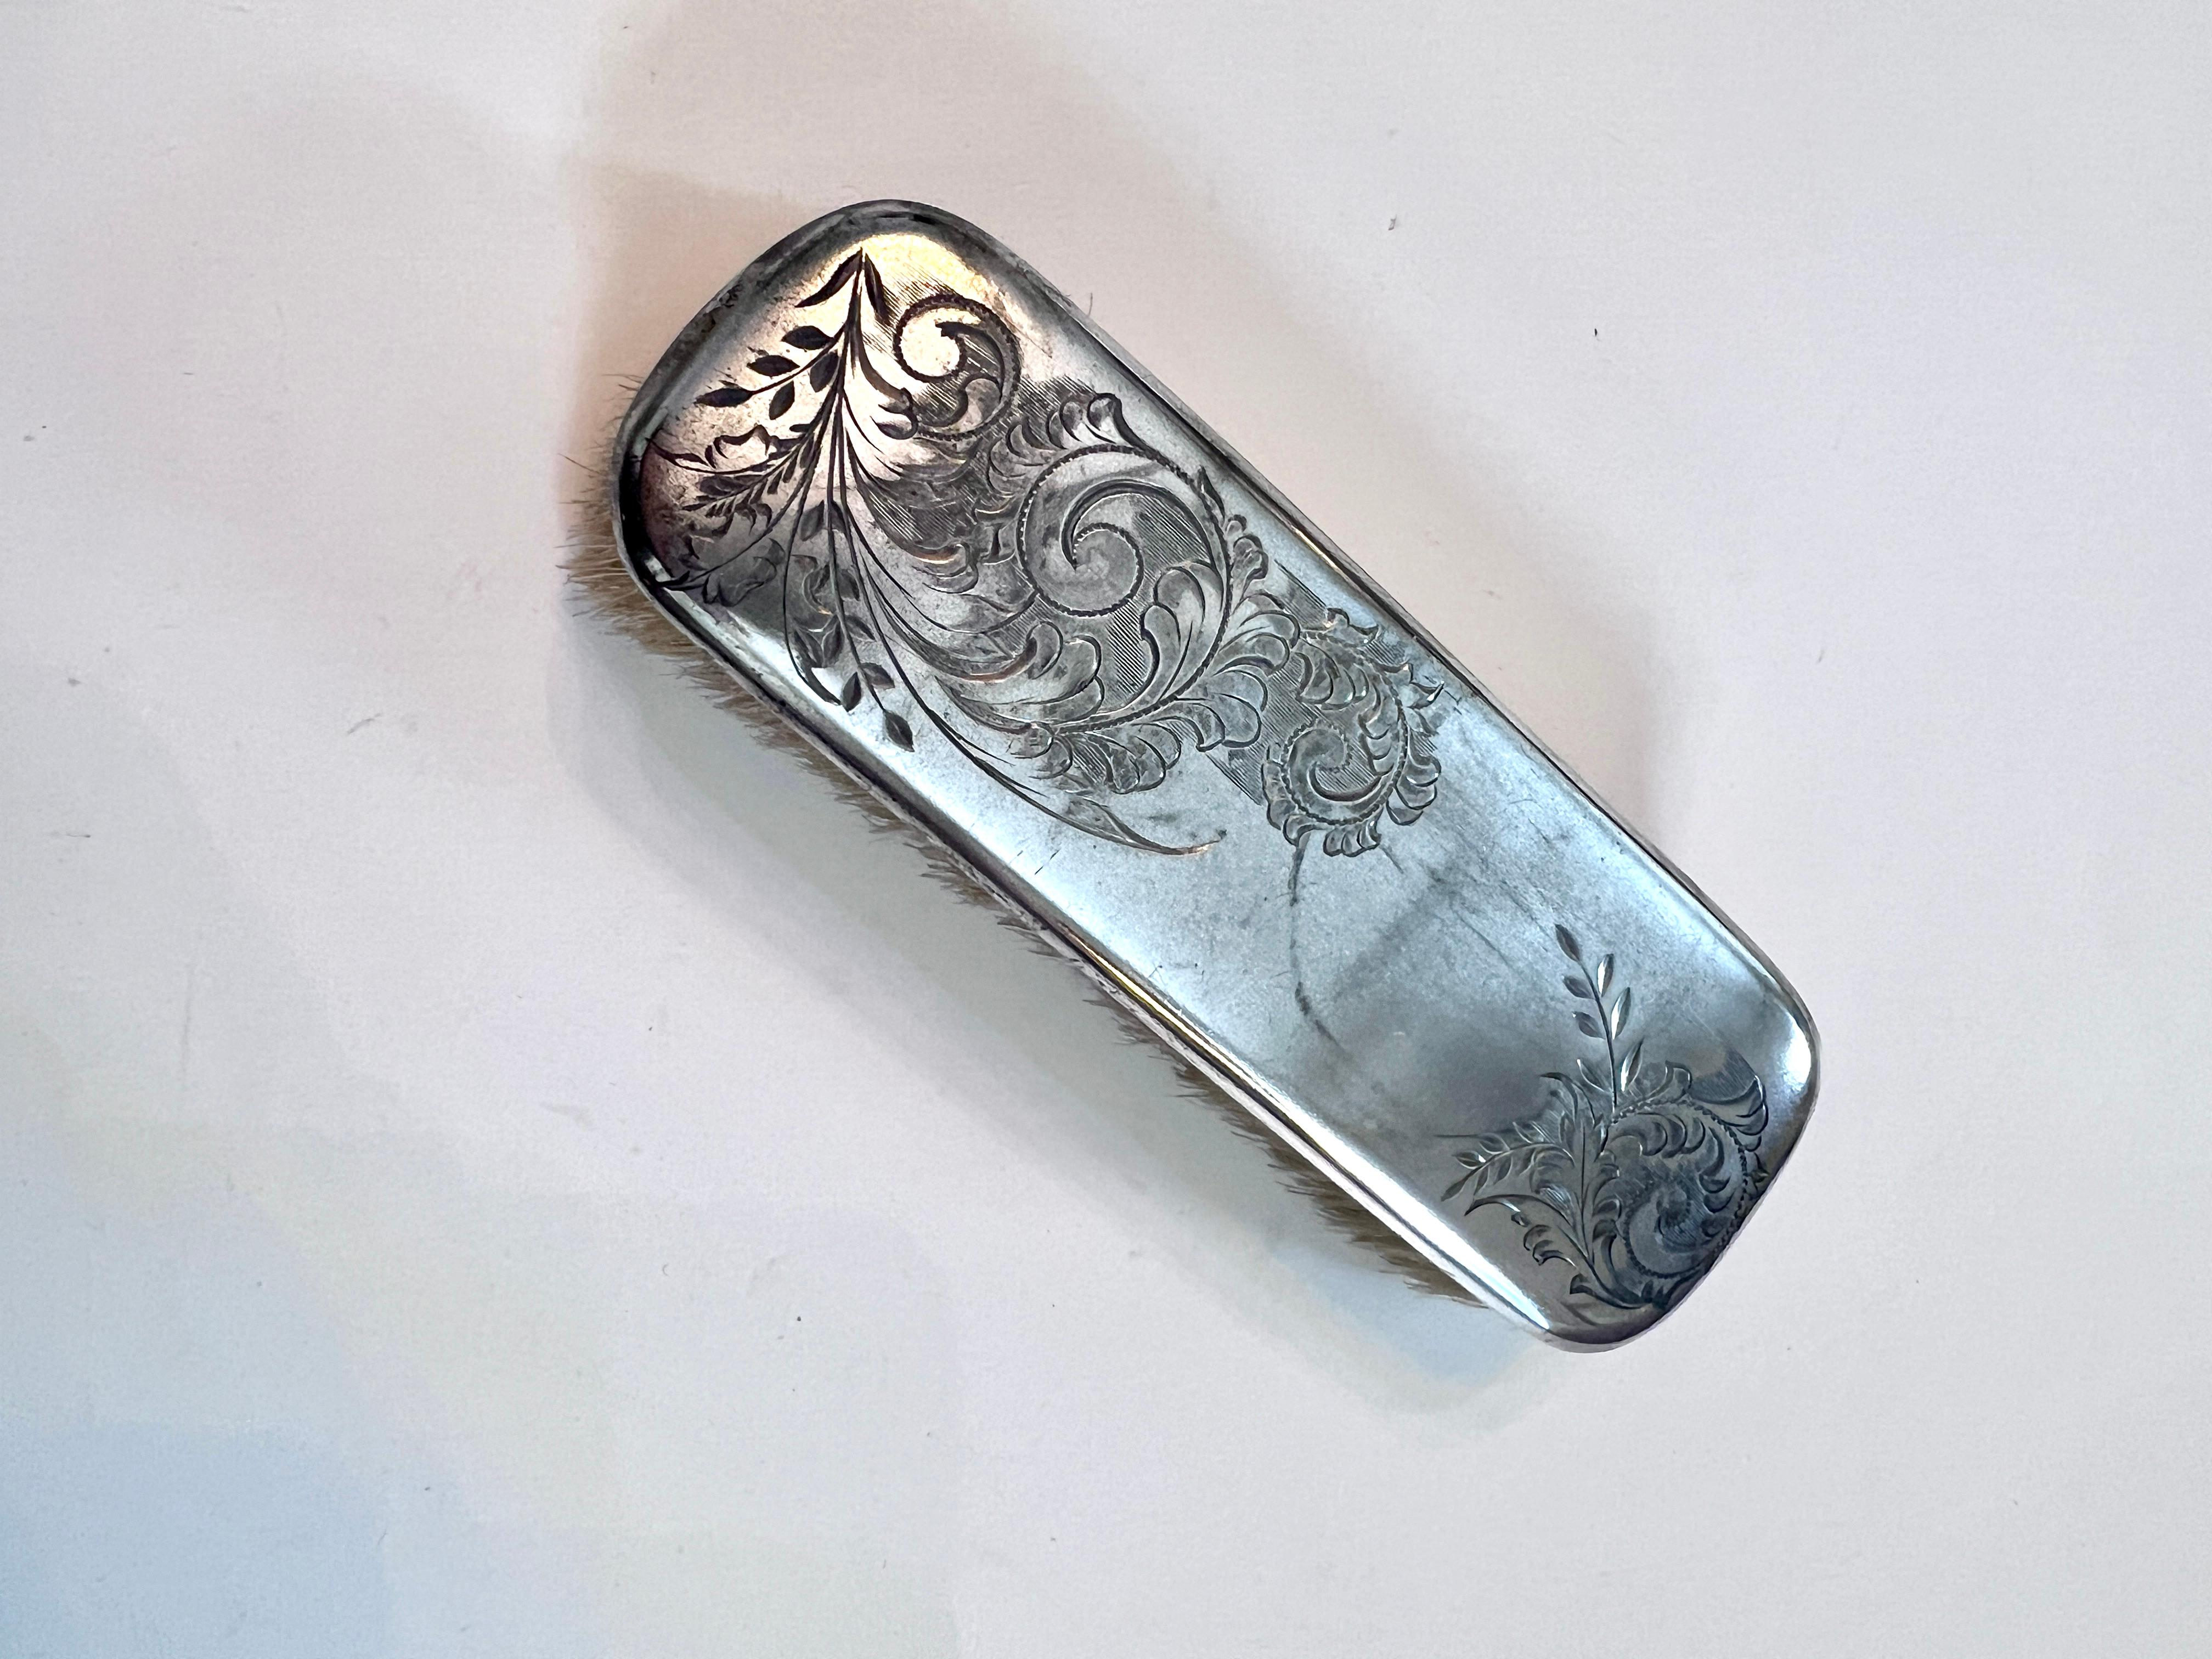 A beautiful Etched Silver Clothing Brush with natural Bristles.

The brush would be a compliment to any mens or women's closet or vanity and valet.  A wonderfully practical piece or perfect as decor.  Works like a charm on removing lint and dust